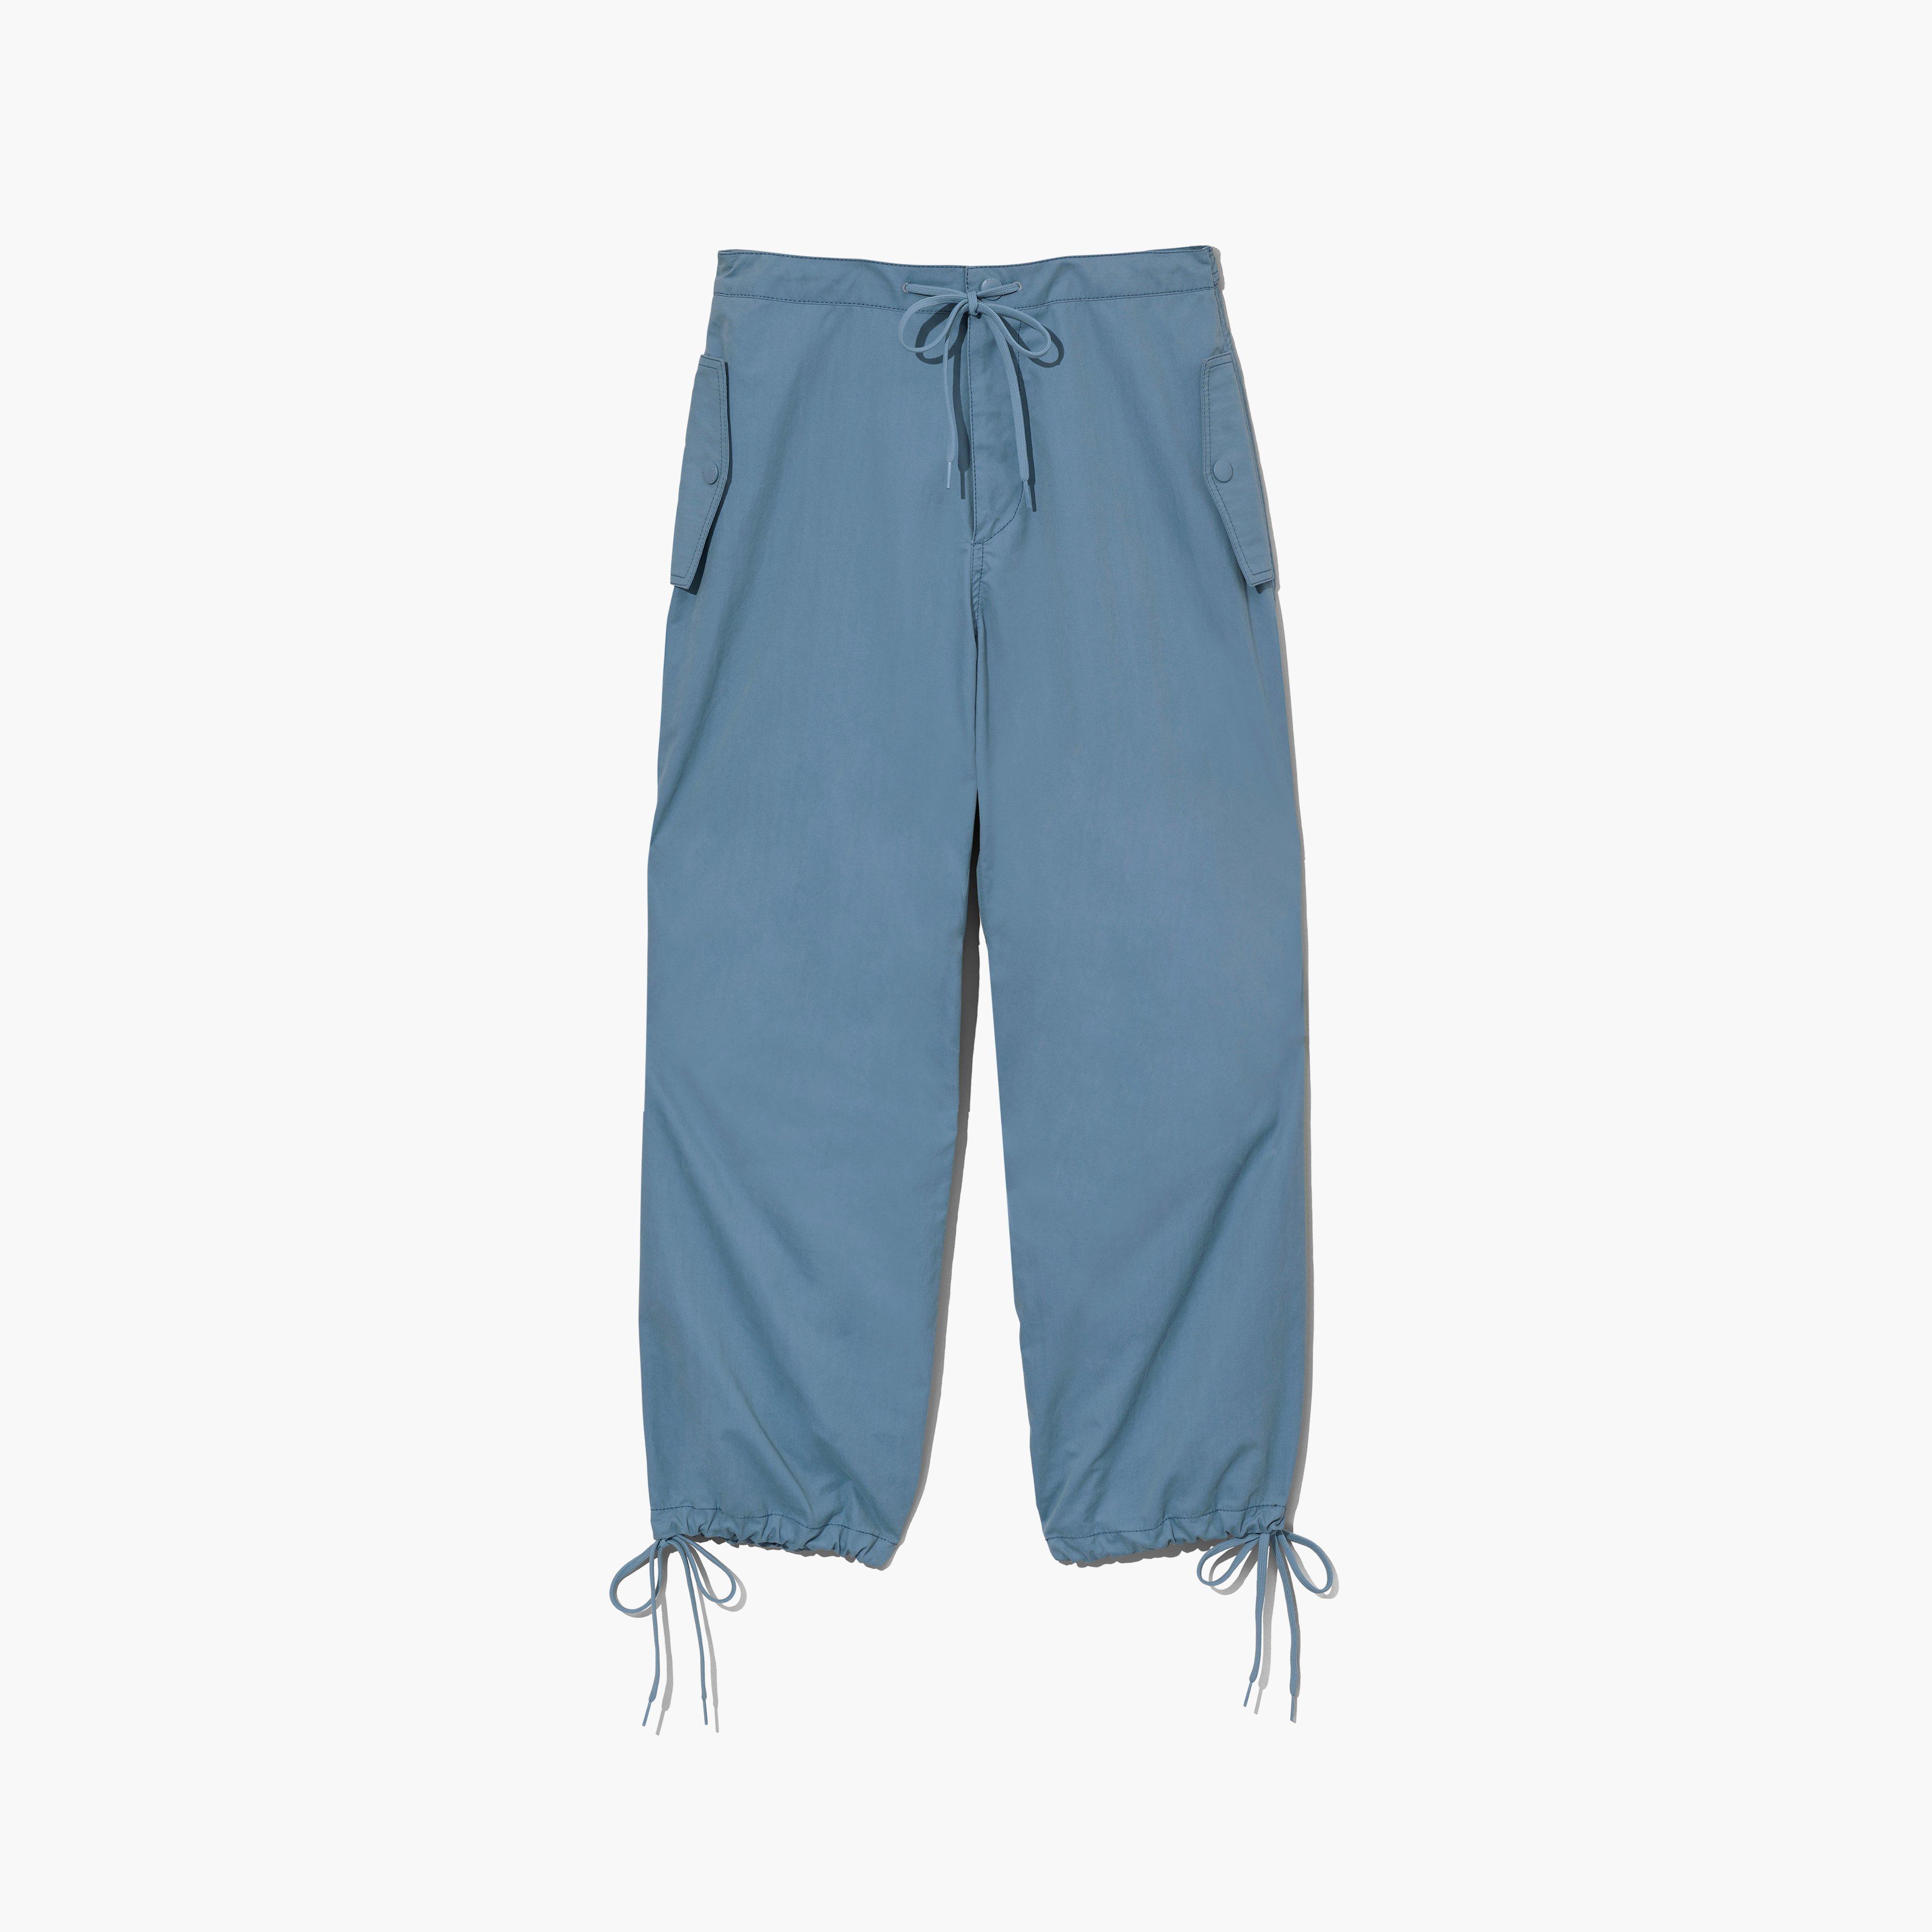 Marc by Marc jacobs The Baggy Drawstring Pant,BLUE SHADOW